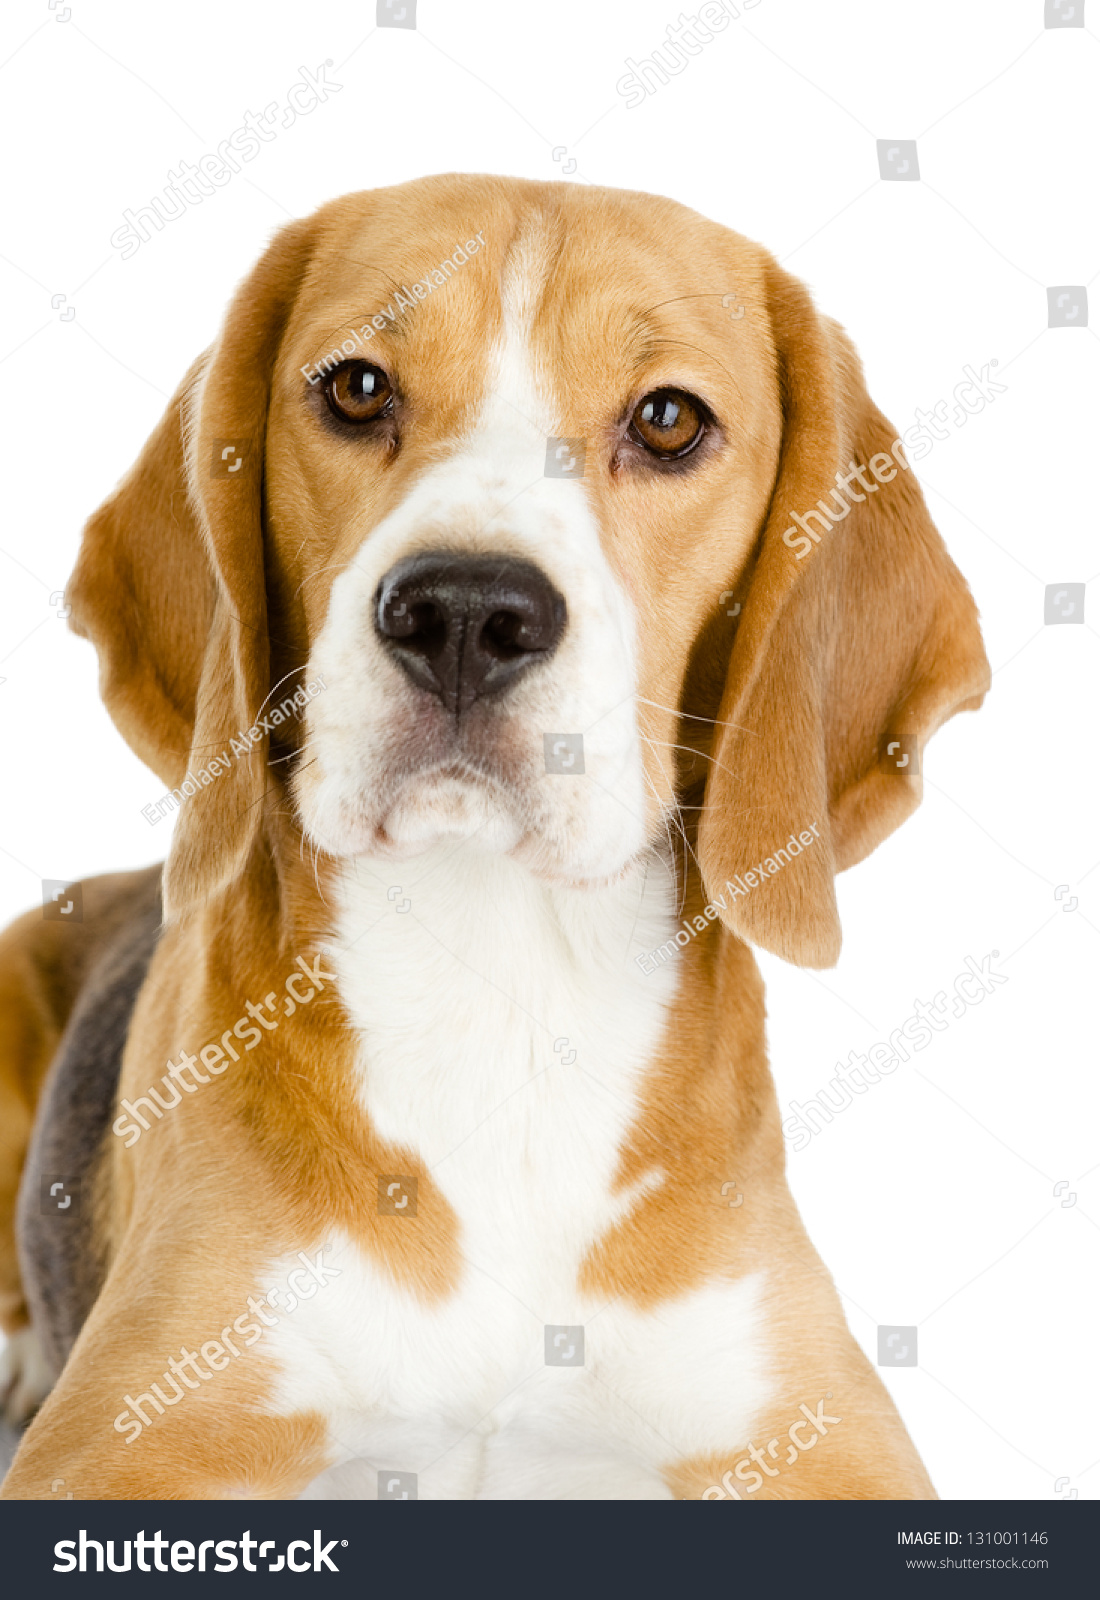 Close-up of Beagle puppy in front. isolated on white background #131001146